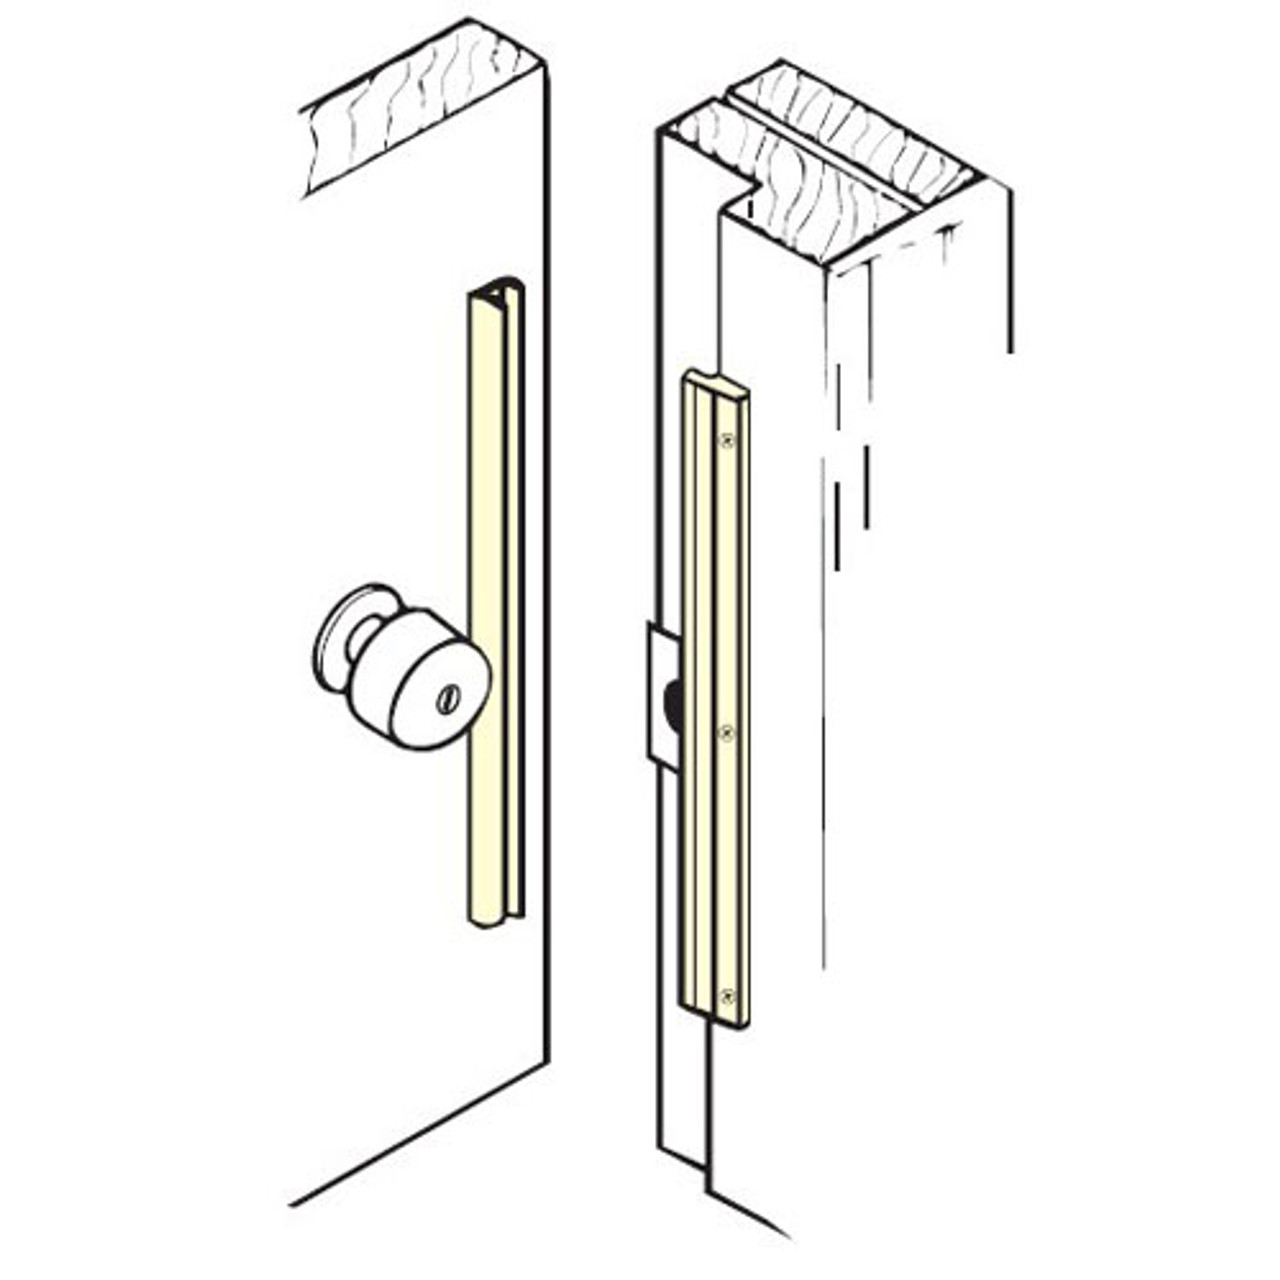 ILP-206-BP Don Jo In-Swinging Latch Protector in Brass Plated Finish